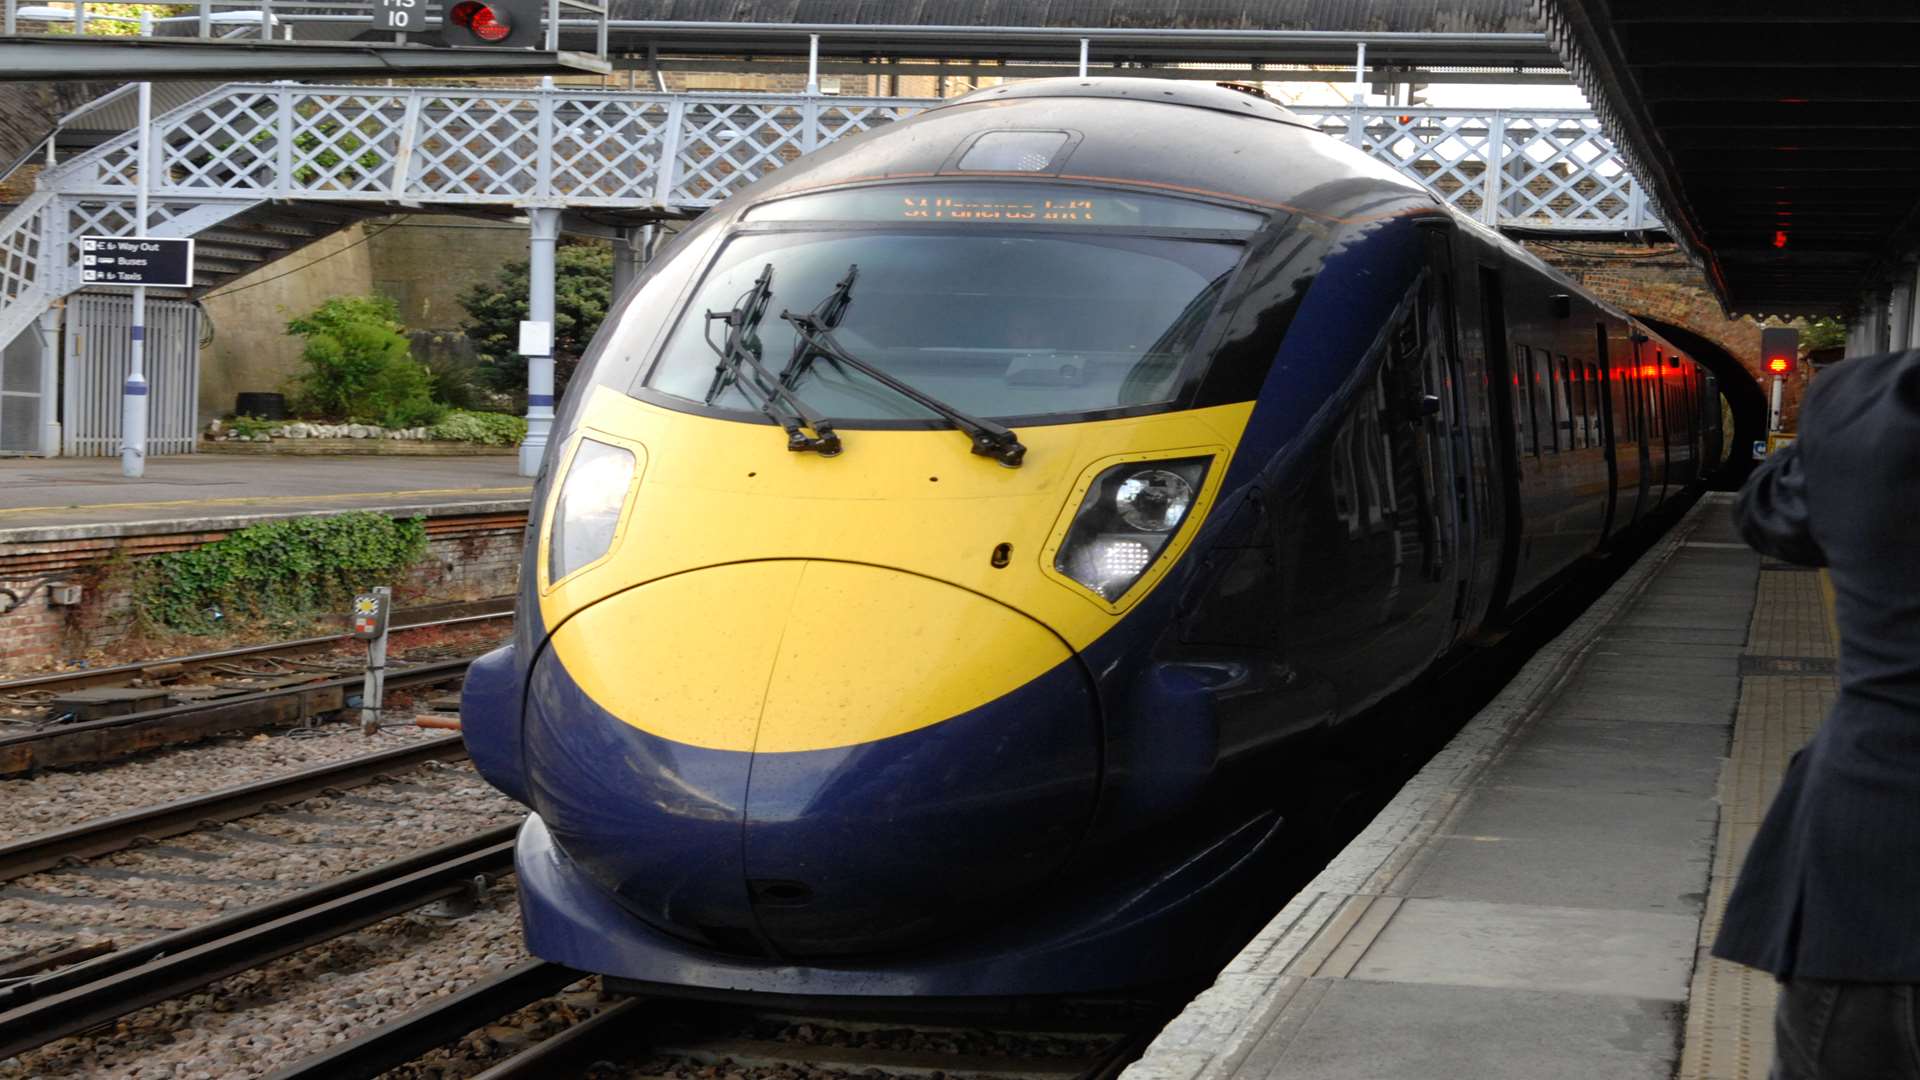 The Kent Messenger newspaper is calling on the Department for Transport to retain the much-valued high speed services from Maidstone West to London St Pancras.